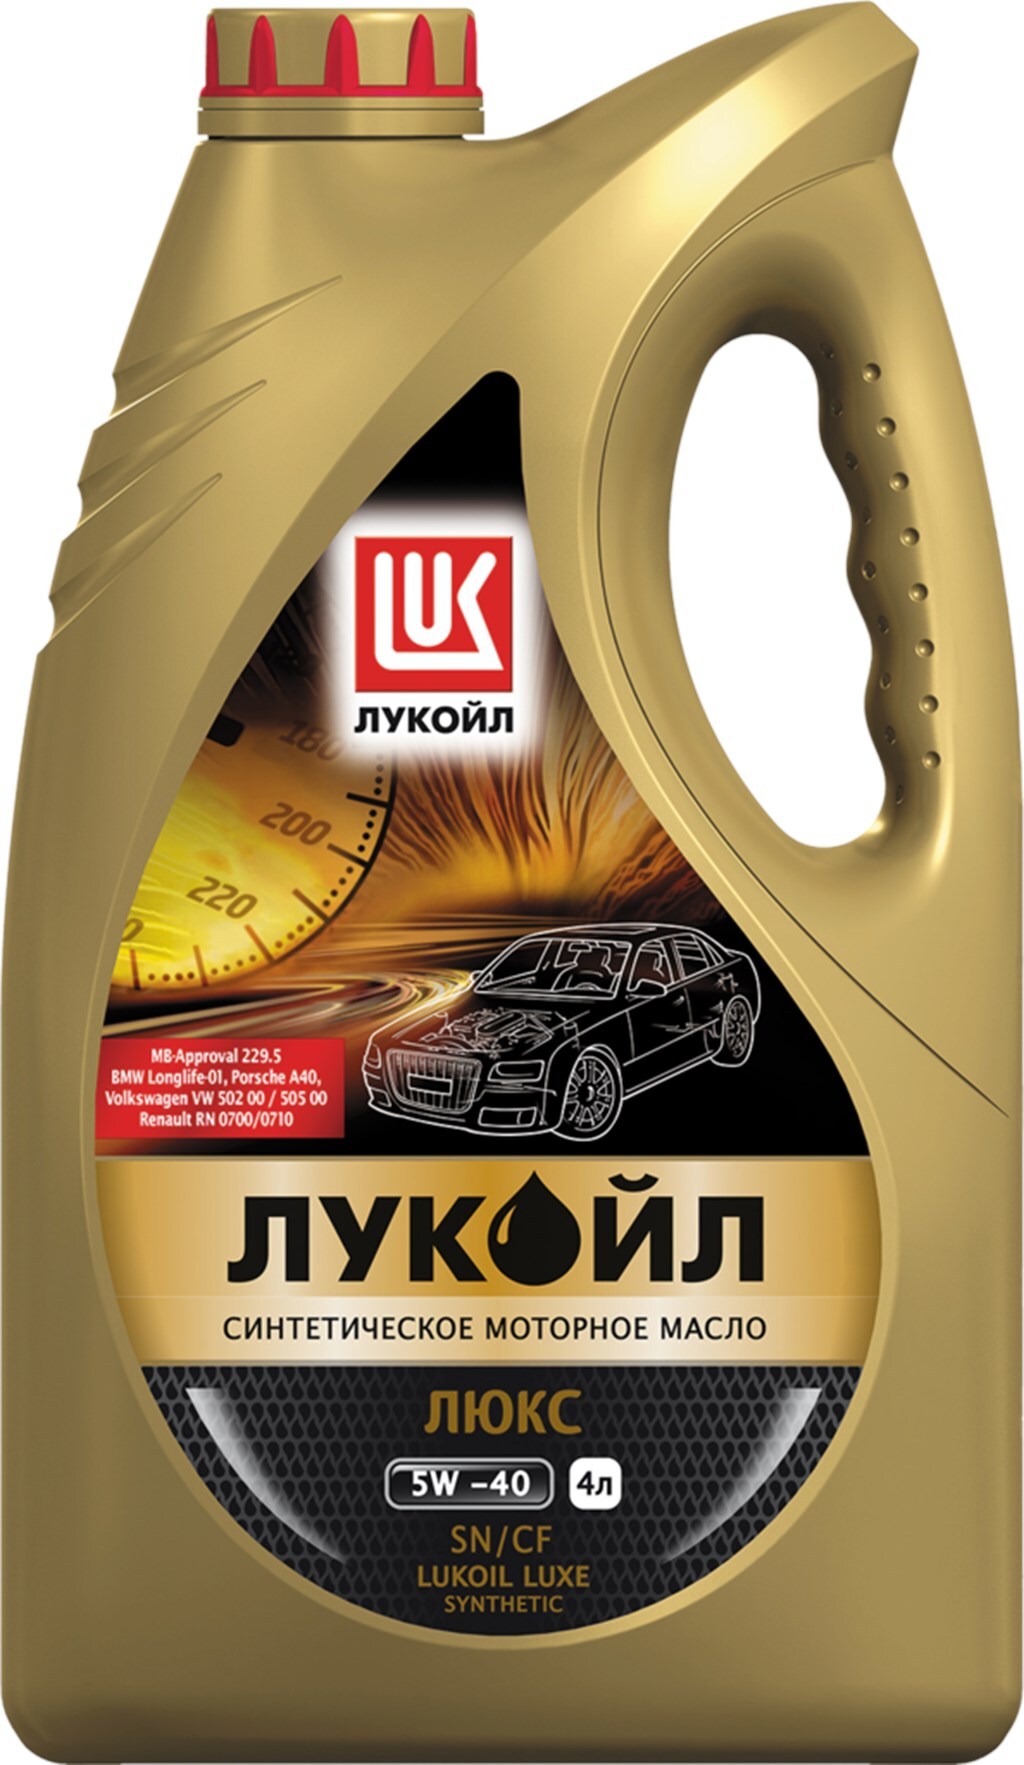 Масло api ch. Lukoil Luxe 5w-40. Лукойл-Люкс 5w40 4л синтетика. Лукойл Люкс 5w40 синтетика. Масло моторное Лукойл Люкс 5w40 синтетика.